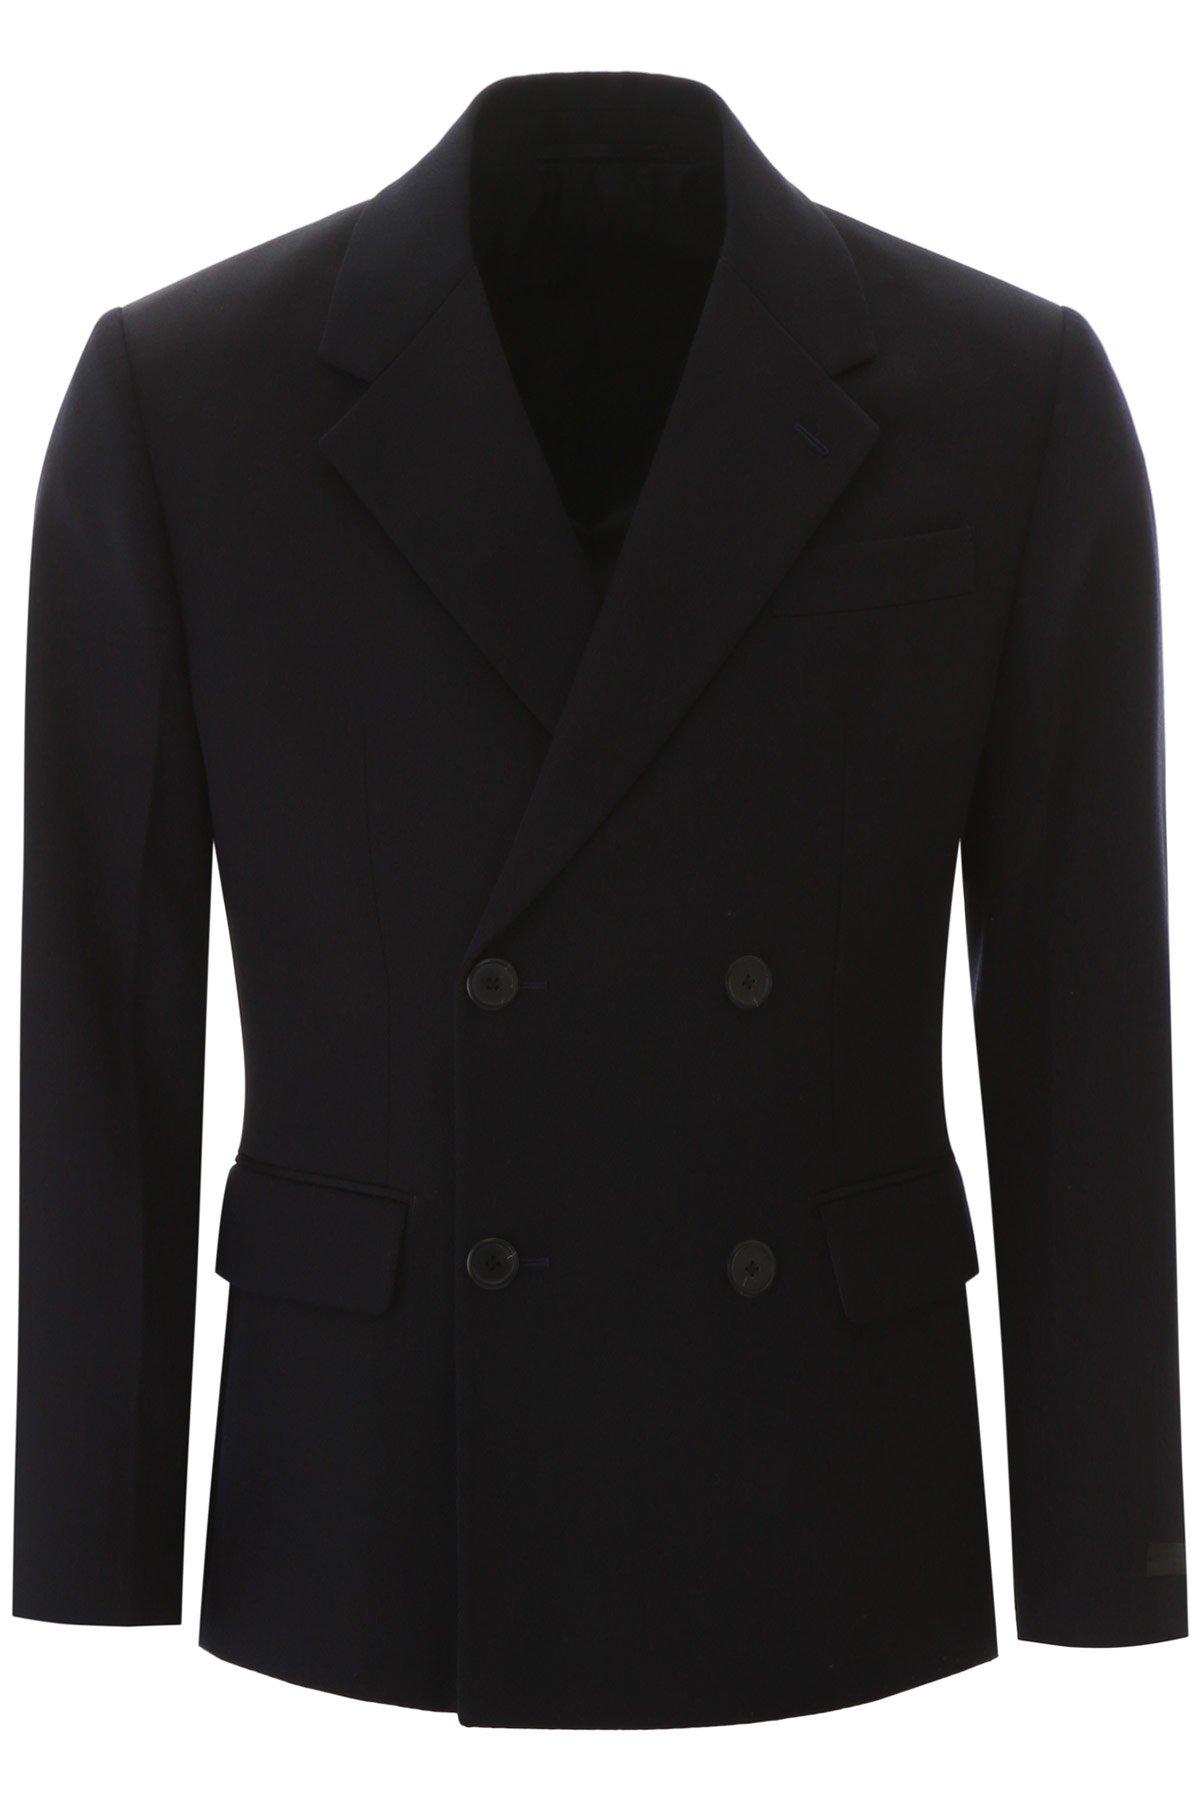 Prada Double-breasted Wool Blazer in Navy (Blue) for Men - Save 13% - Lyst